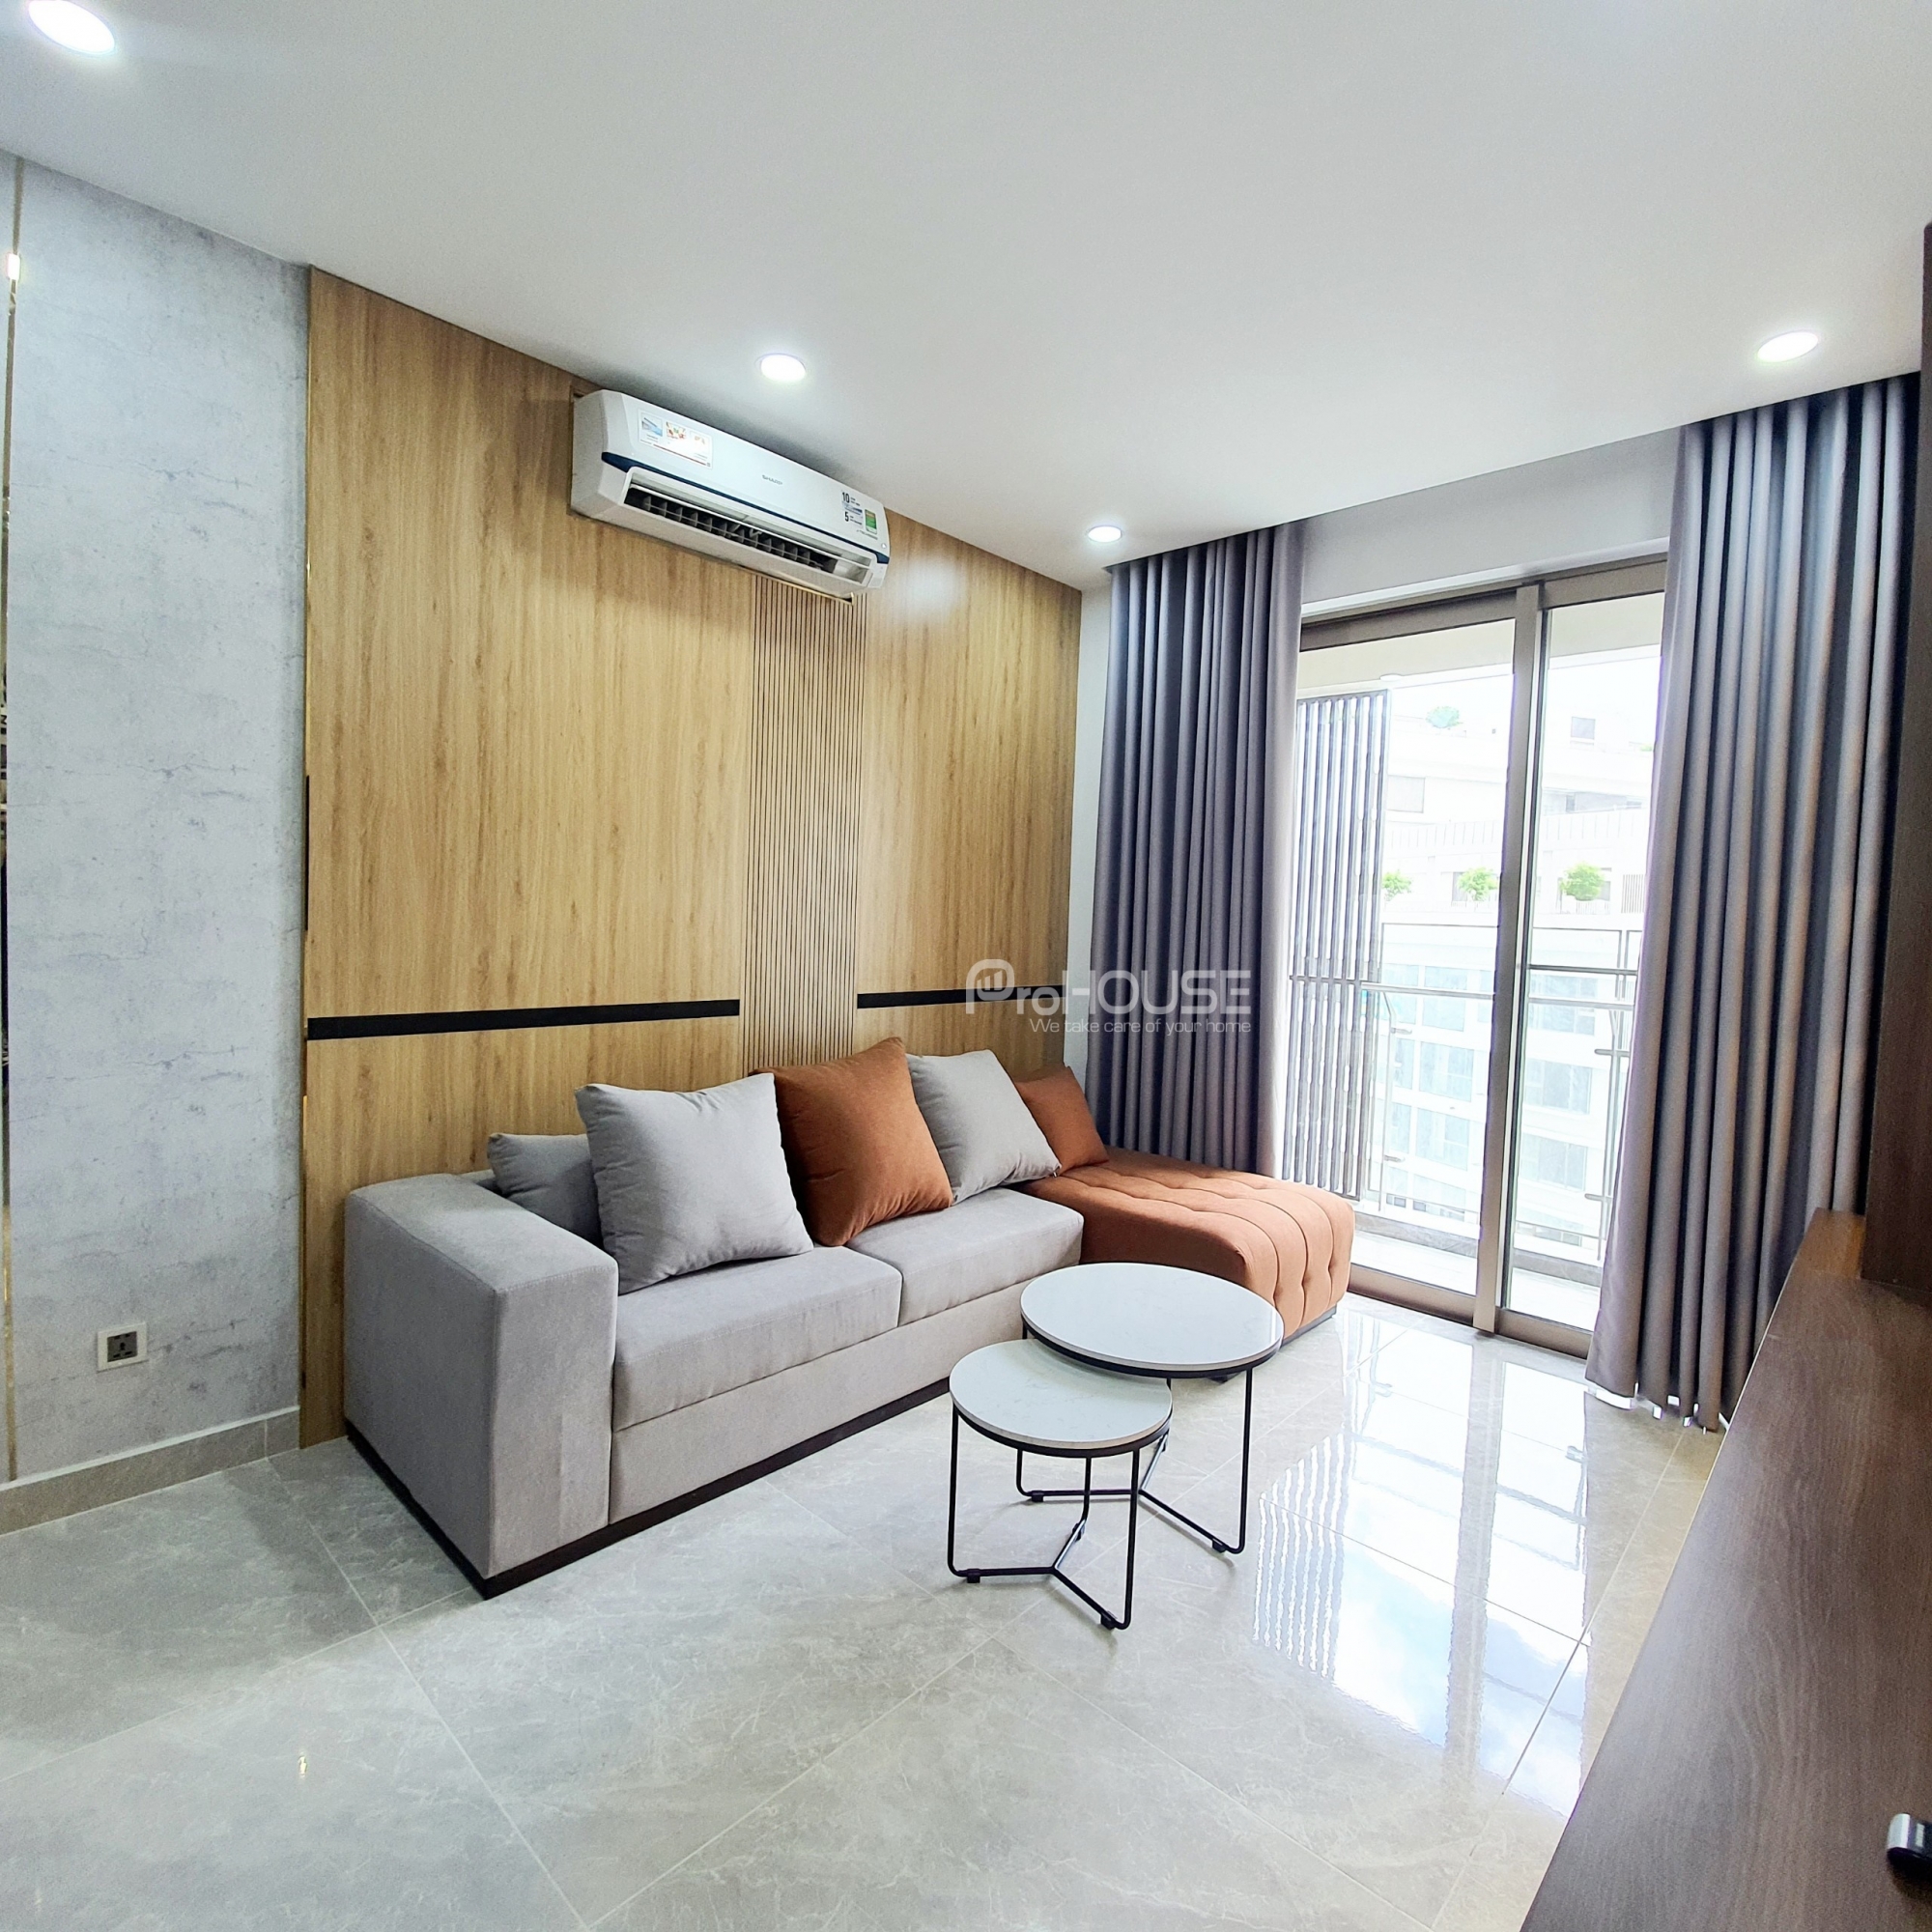 Luxury 2 bedroom apartment for rent in The Peak with full furniture